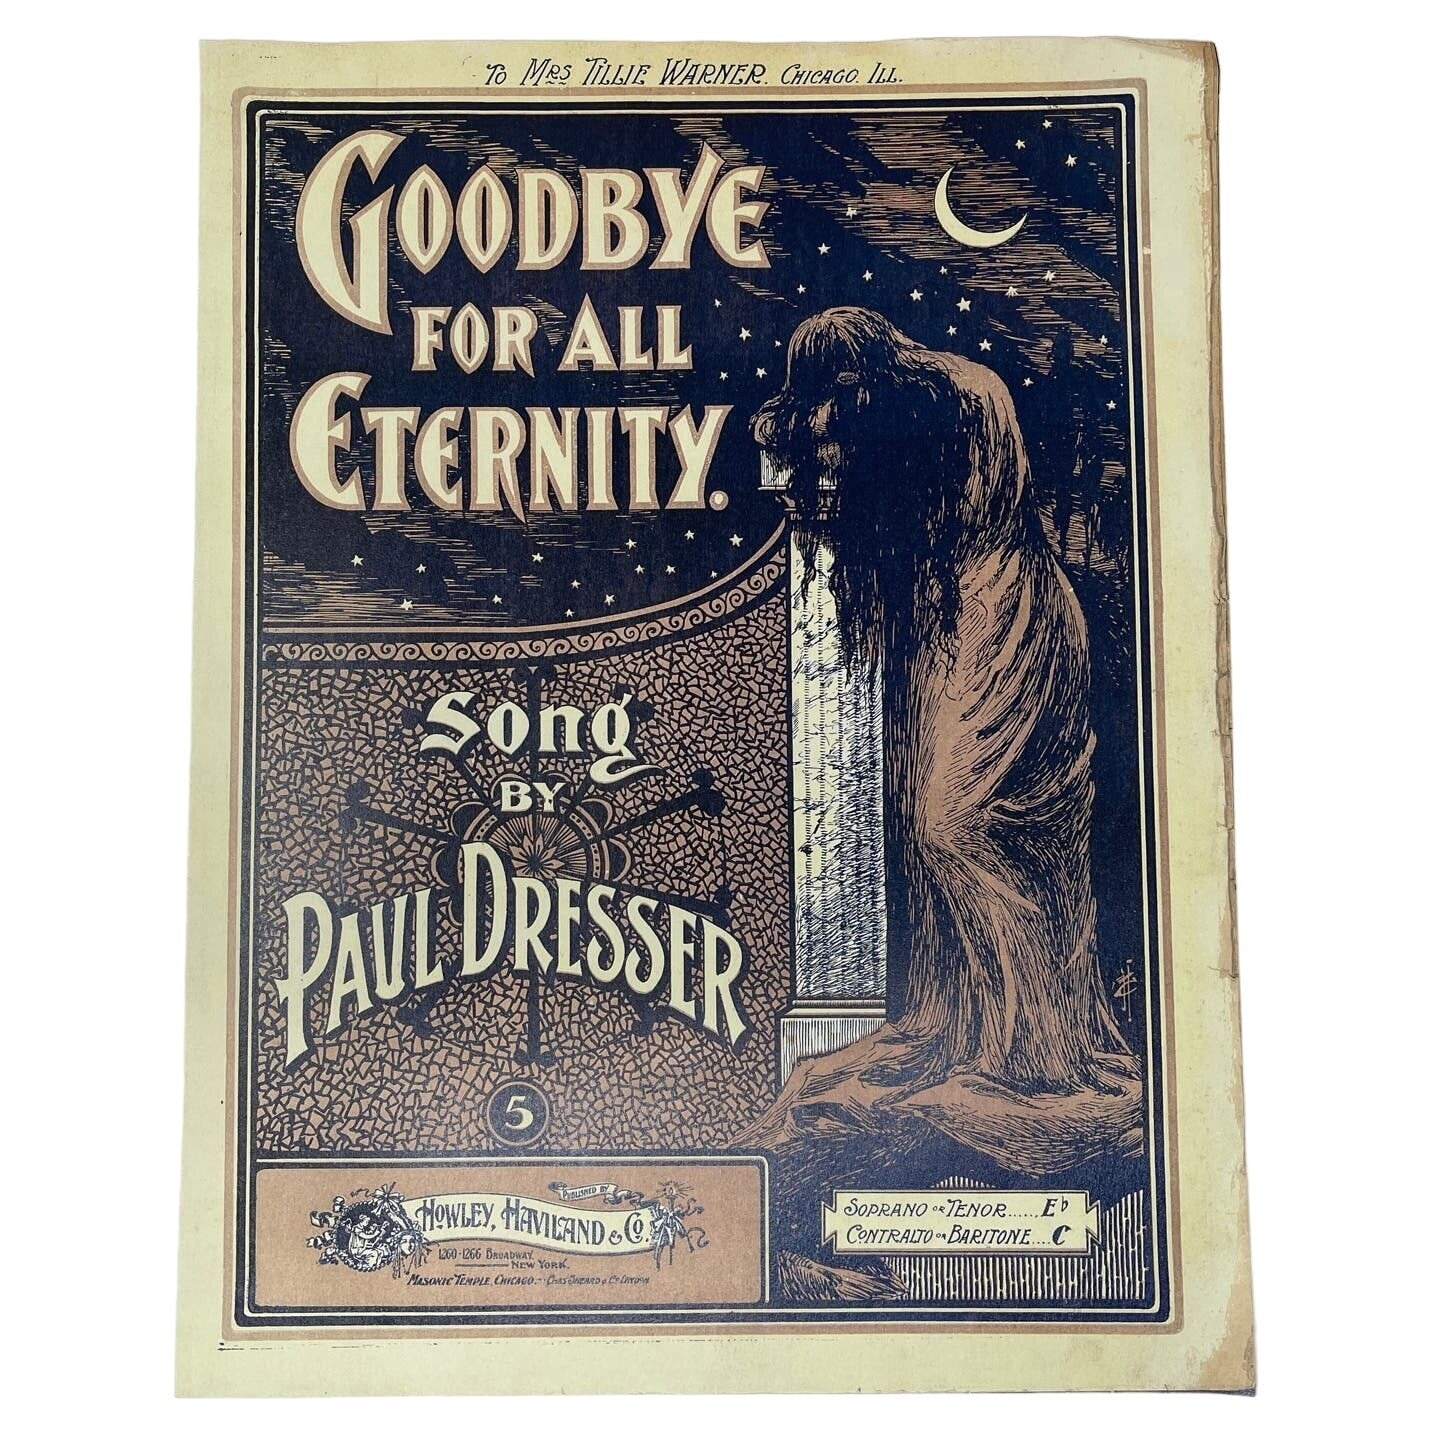 Front Cover Copies Antique Sheet Music Copies All Songs by Paul Dresser